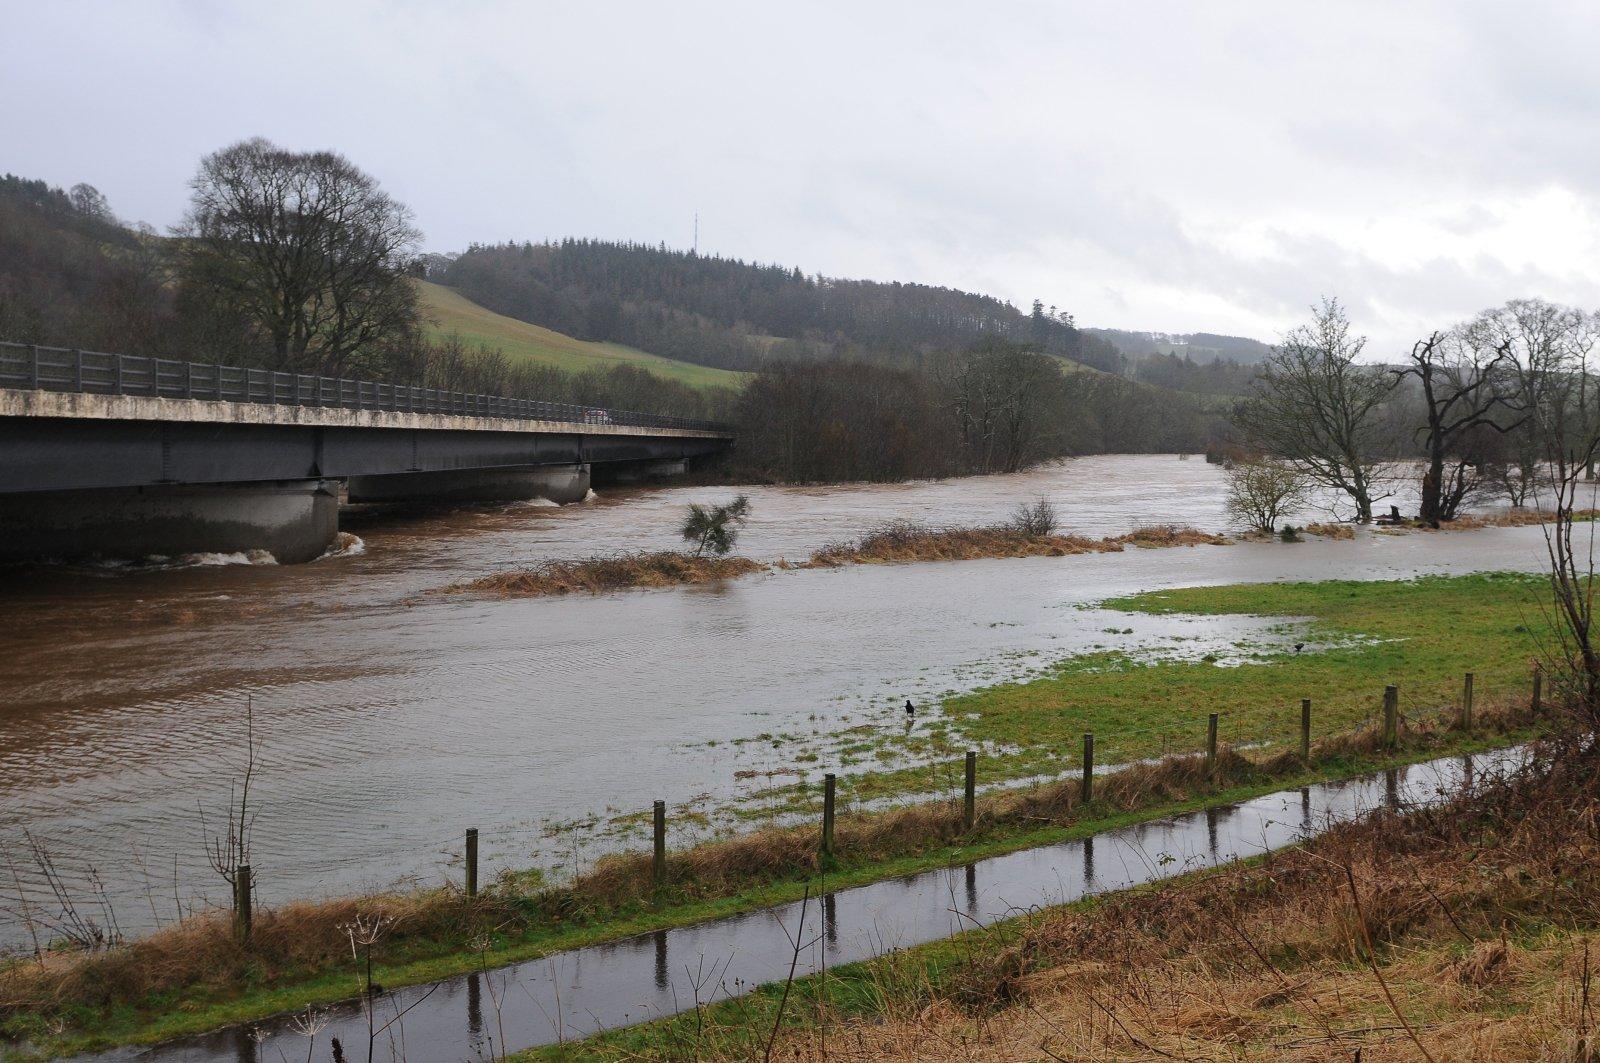 Flooding at the convergence of the River Tweed and Ettrick Water between Selkirk and Galashiels.